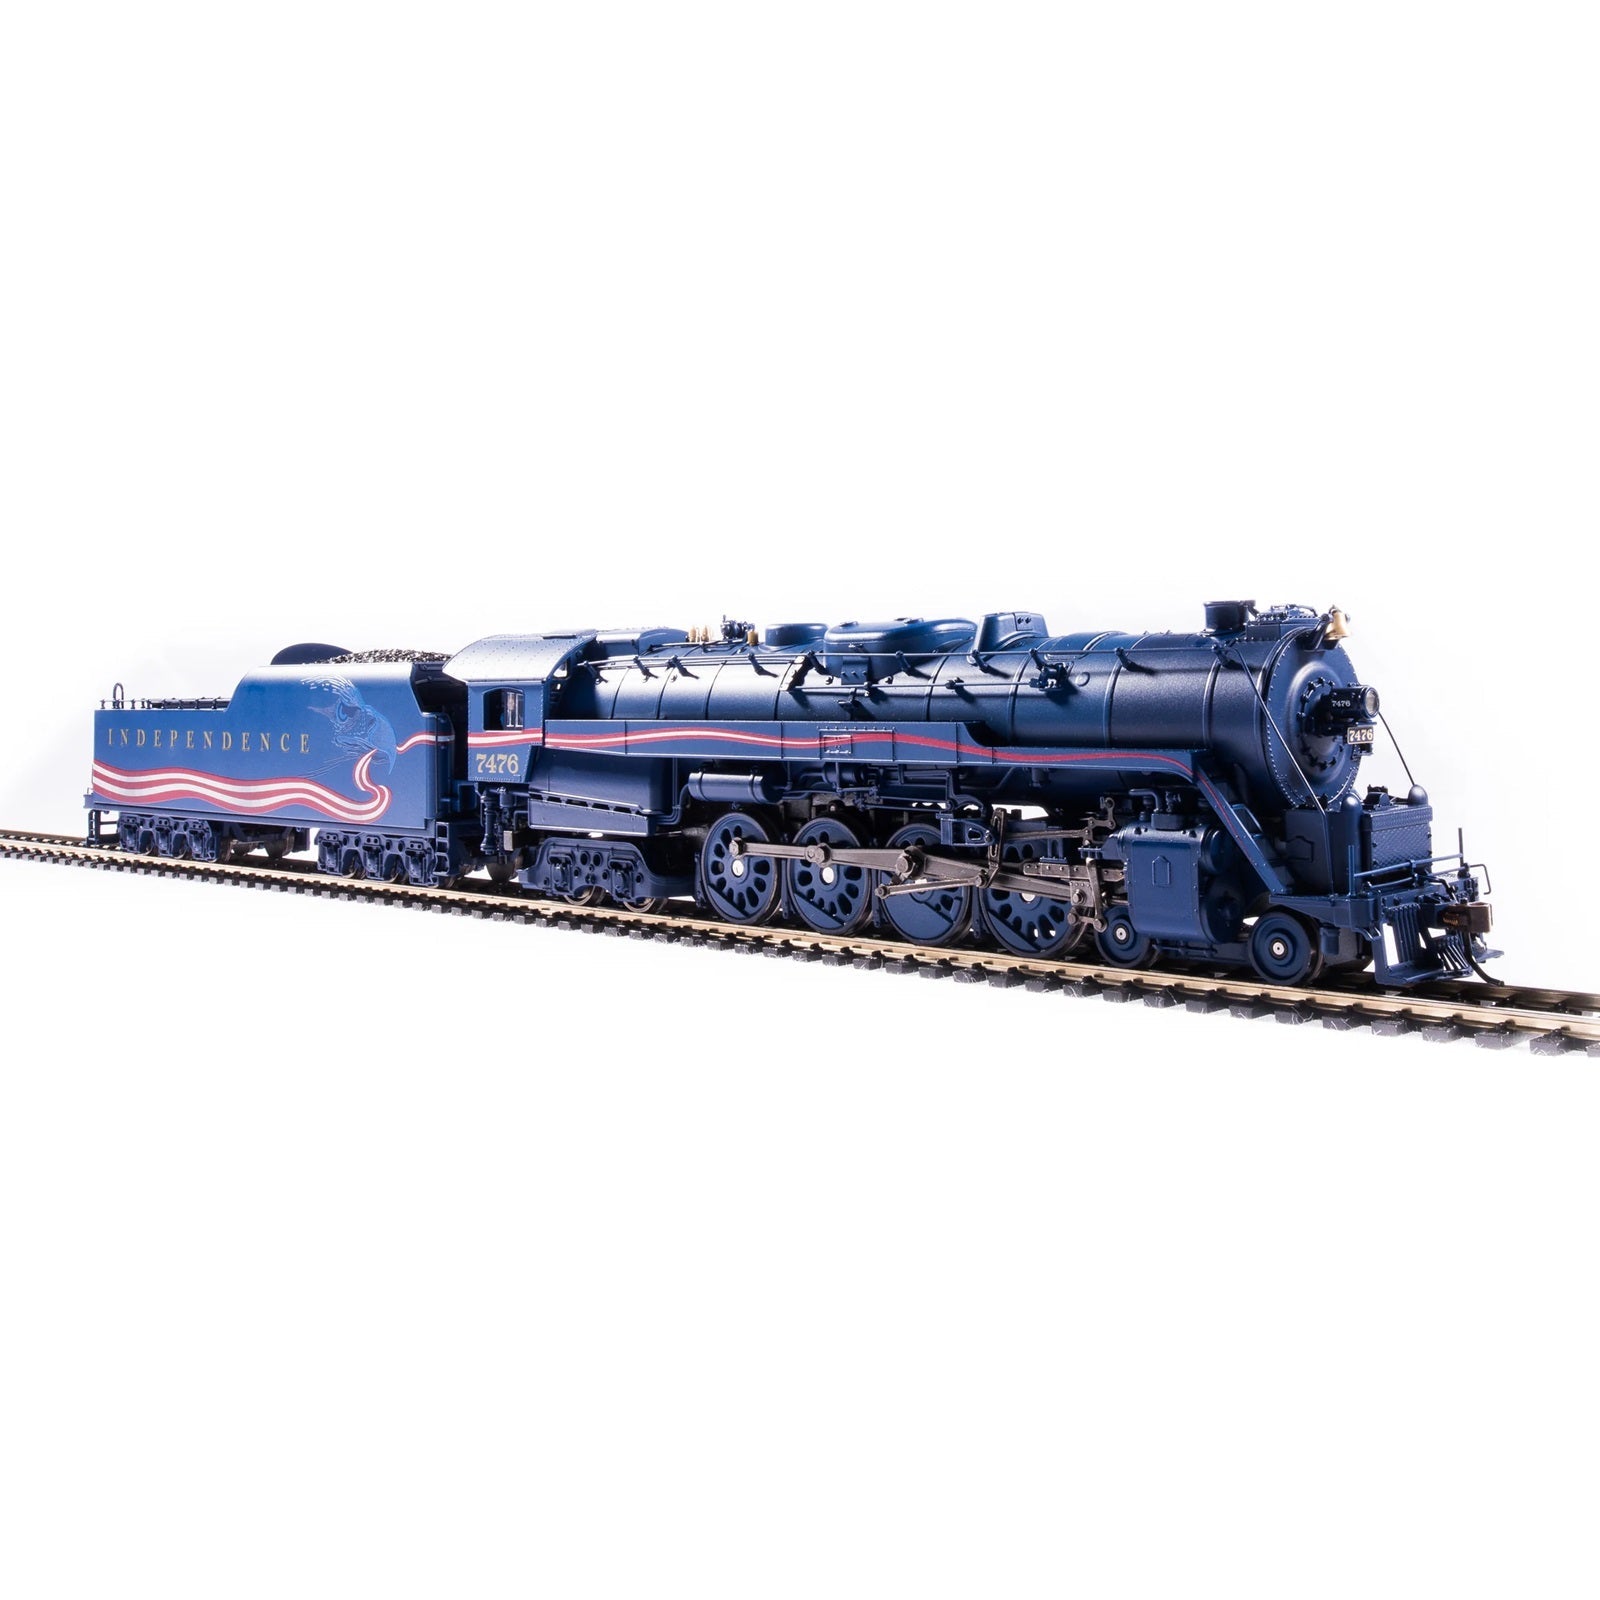 Broadway Limited Reading T1 4 - 8 - 4 Independence Day Fantasy Paint Scheme Paragon4 Sound/DC/DCC Locomotive, N Scale